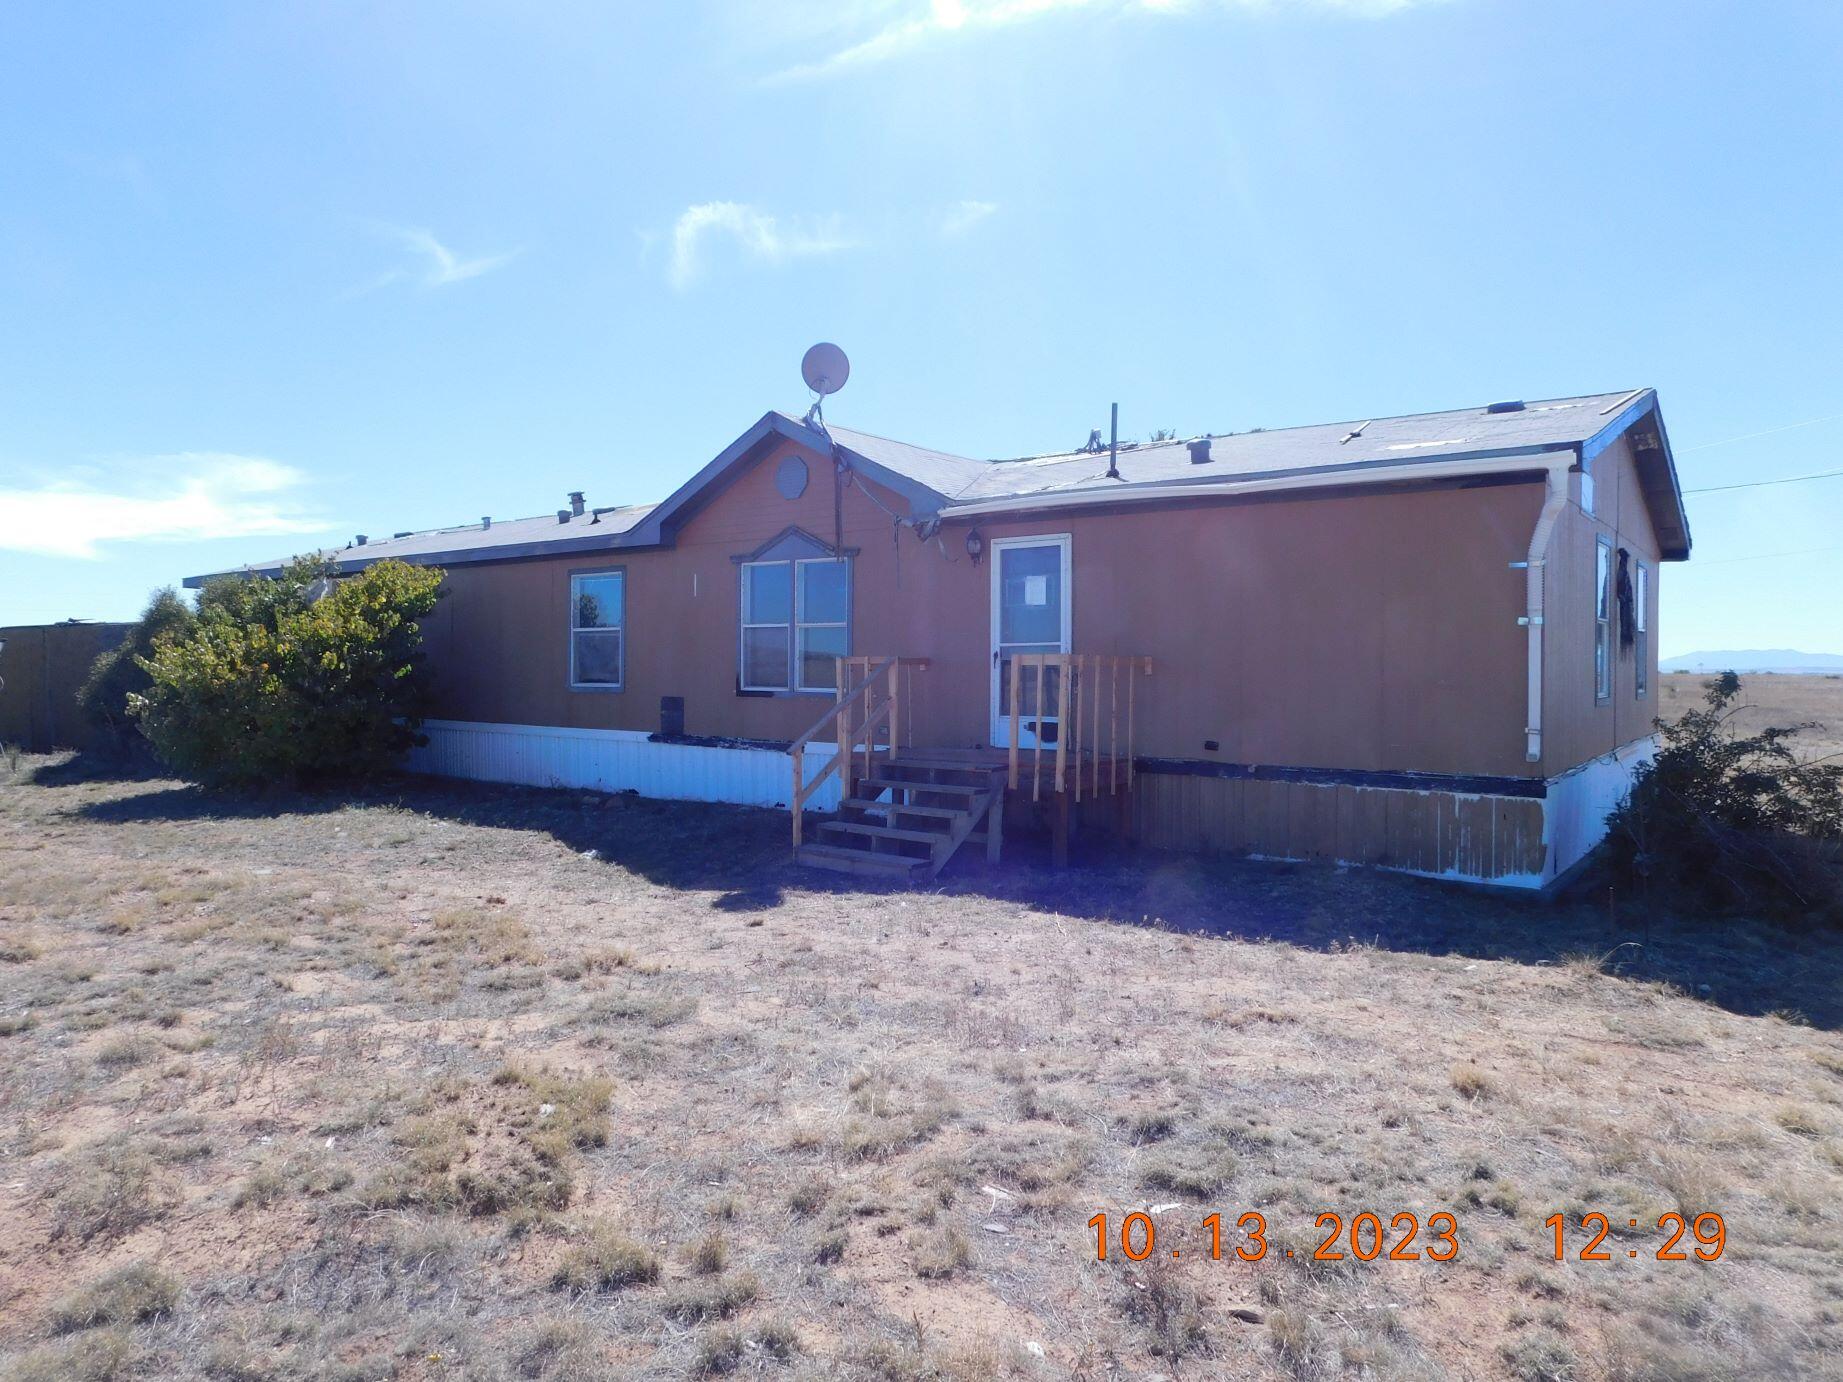 11 Palomino Drive, Moriarty, New Mexico 87035, 4 Bedrooms Bedrooms, ,2 BathroomsBathrooms,Residential,For Sale,11 Palomino Drive,1043299